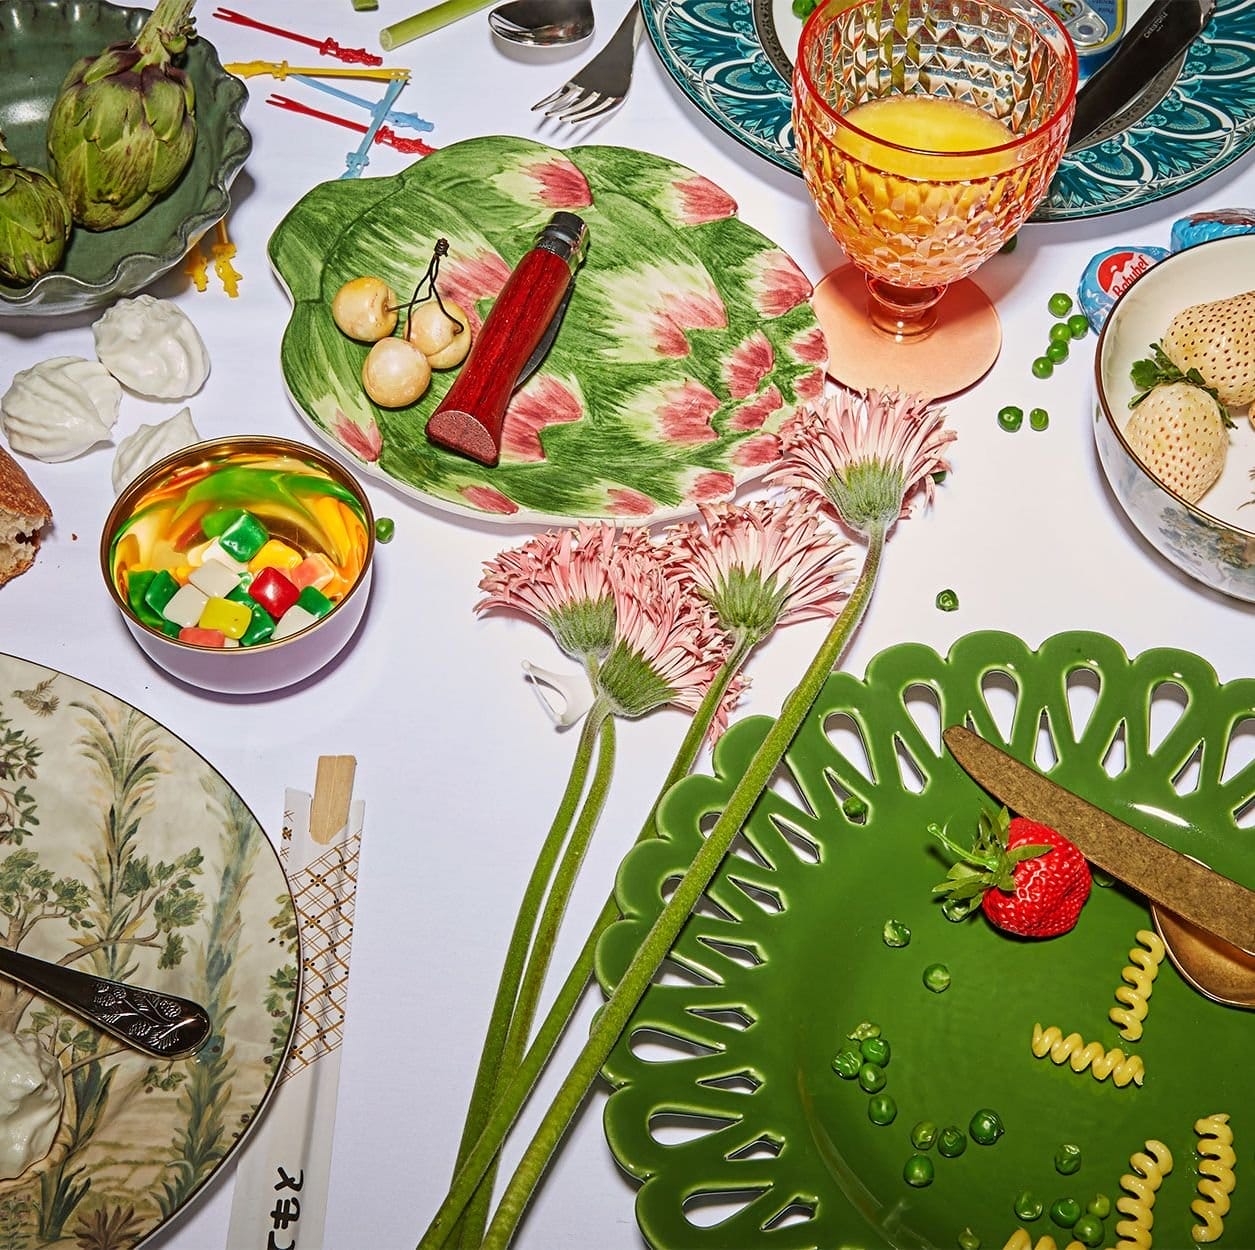 Throw an Unforgettable Dinner Party With These Tabletop Must-Haves